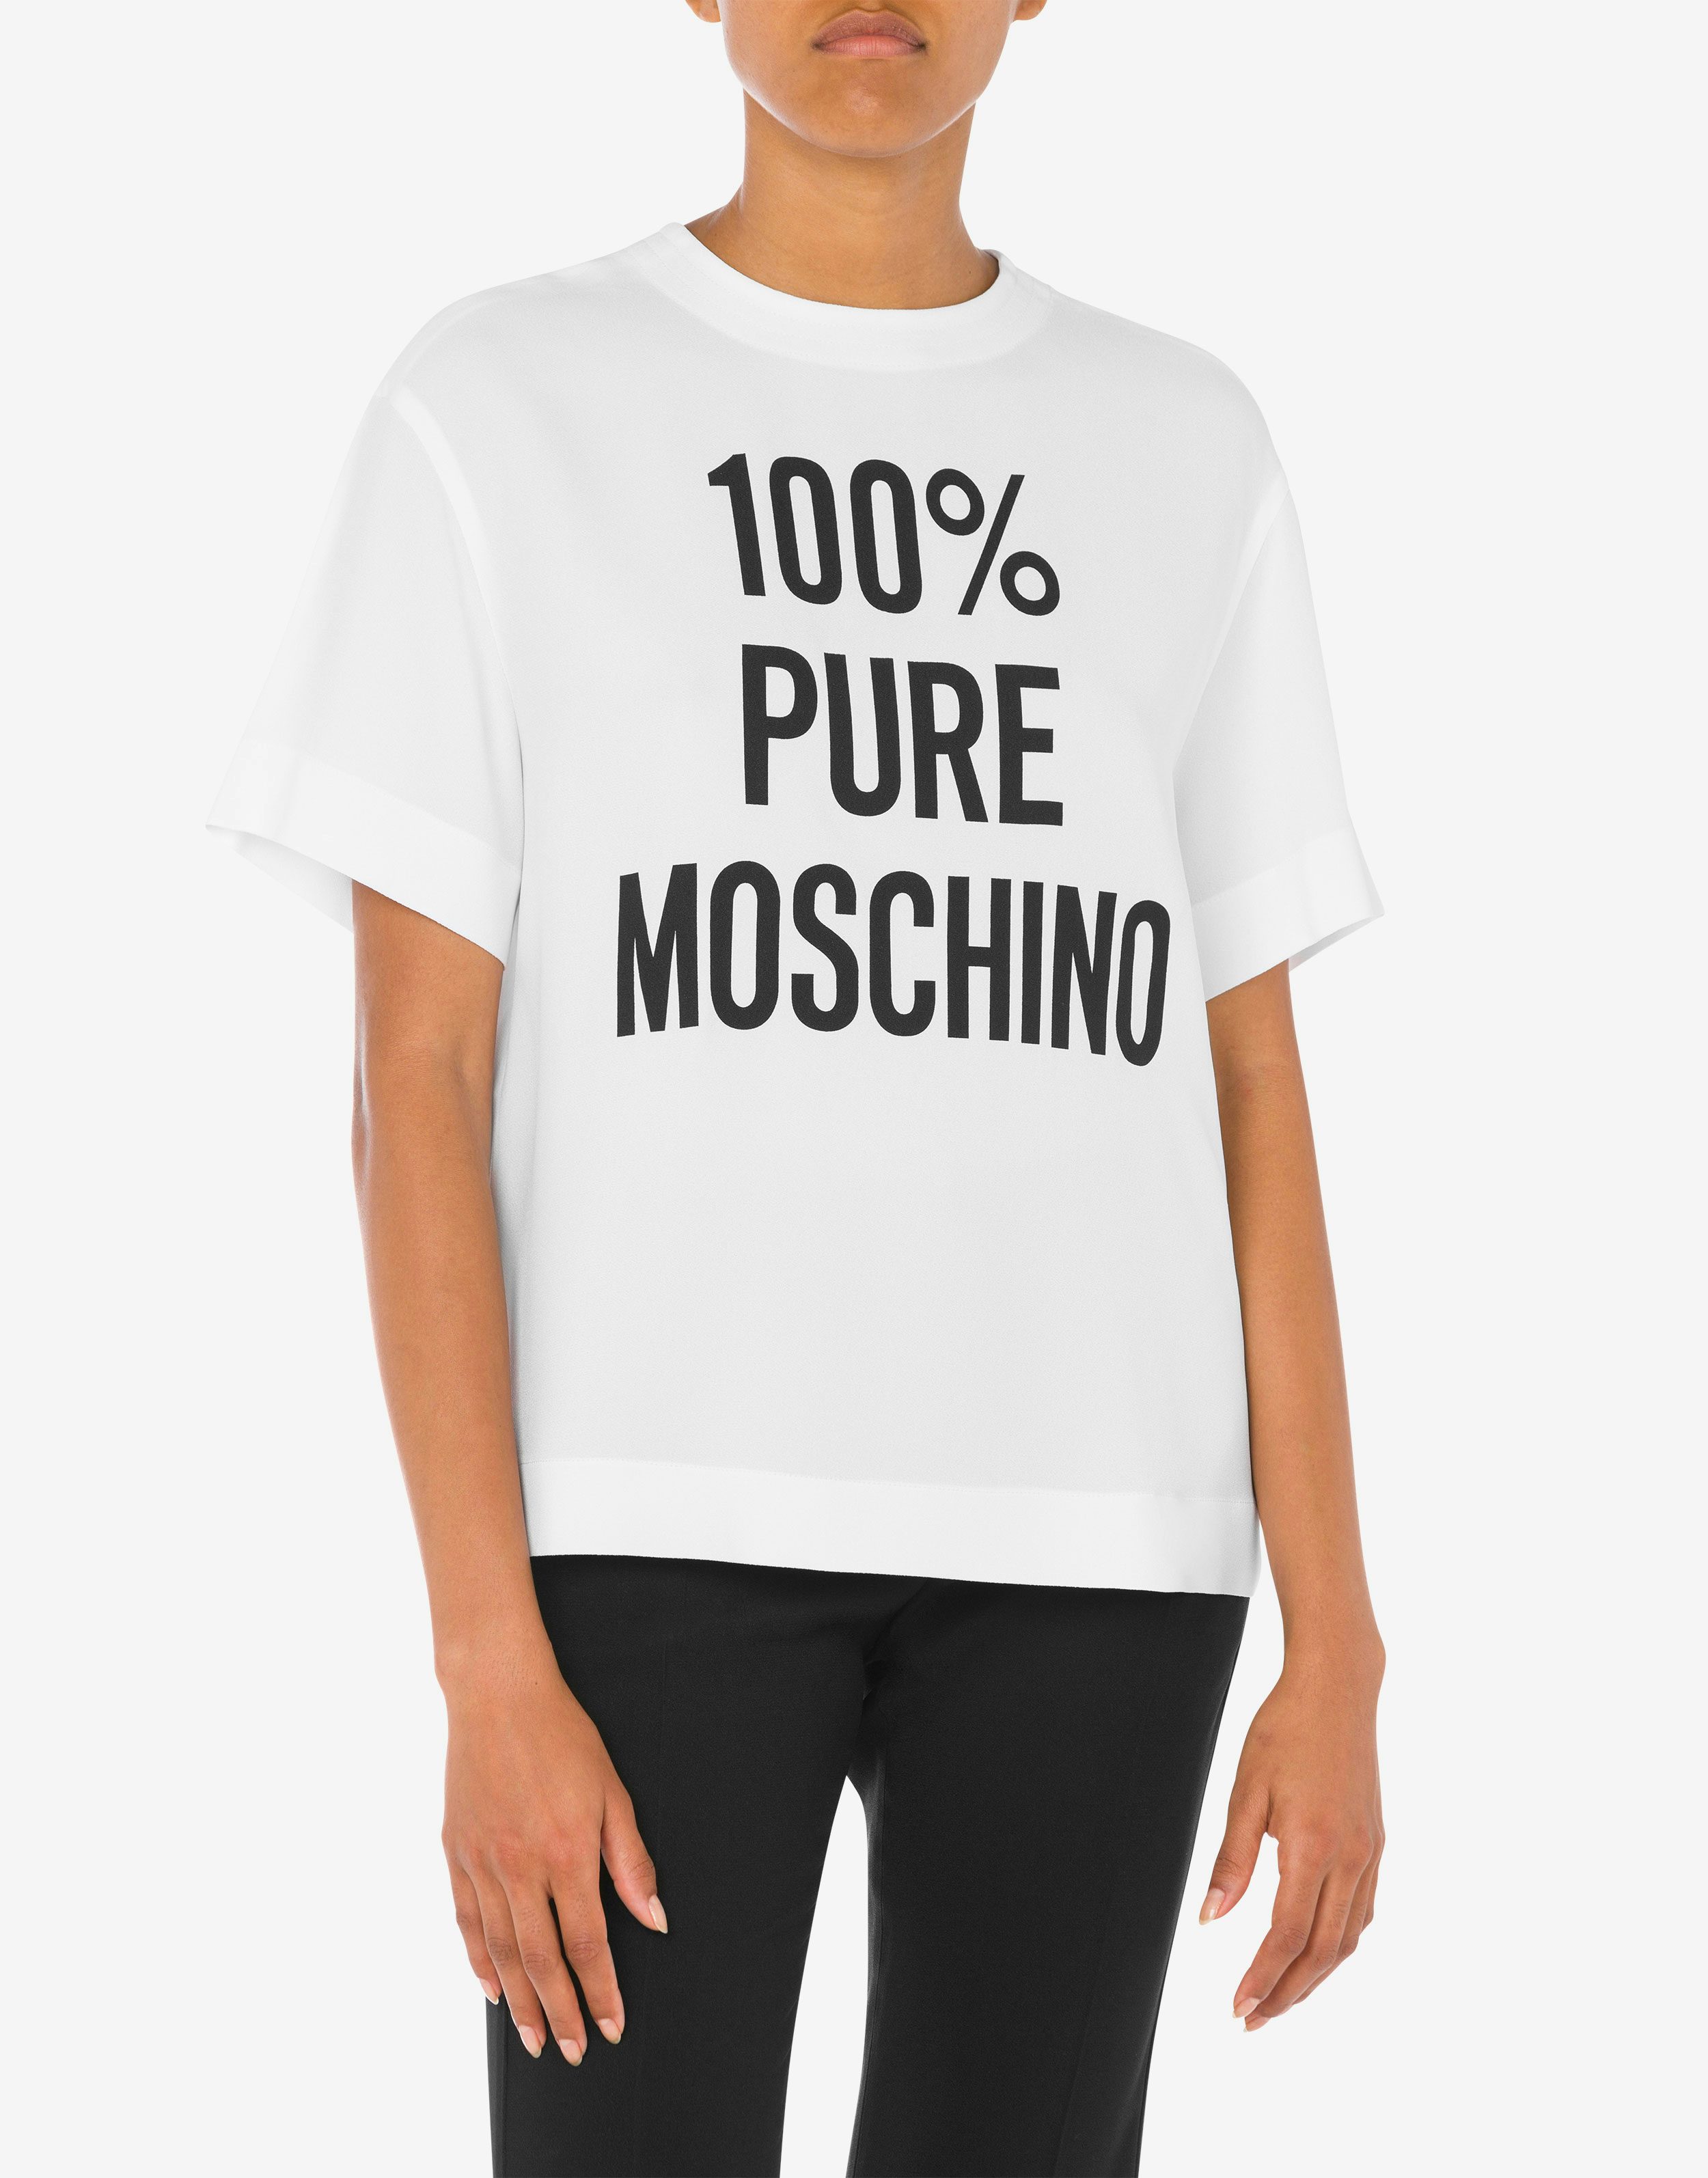 T-shirt in enver satin 100% Pure Moschino Print